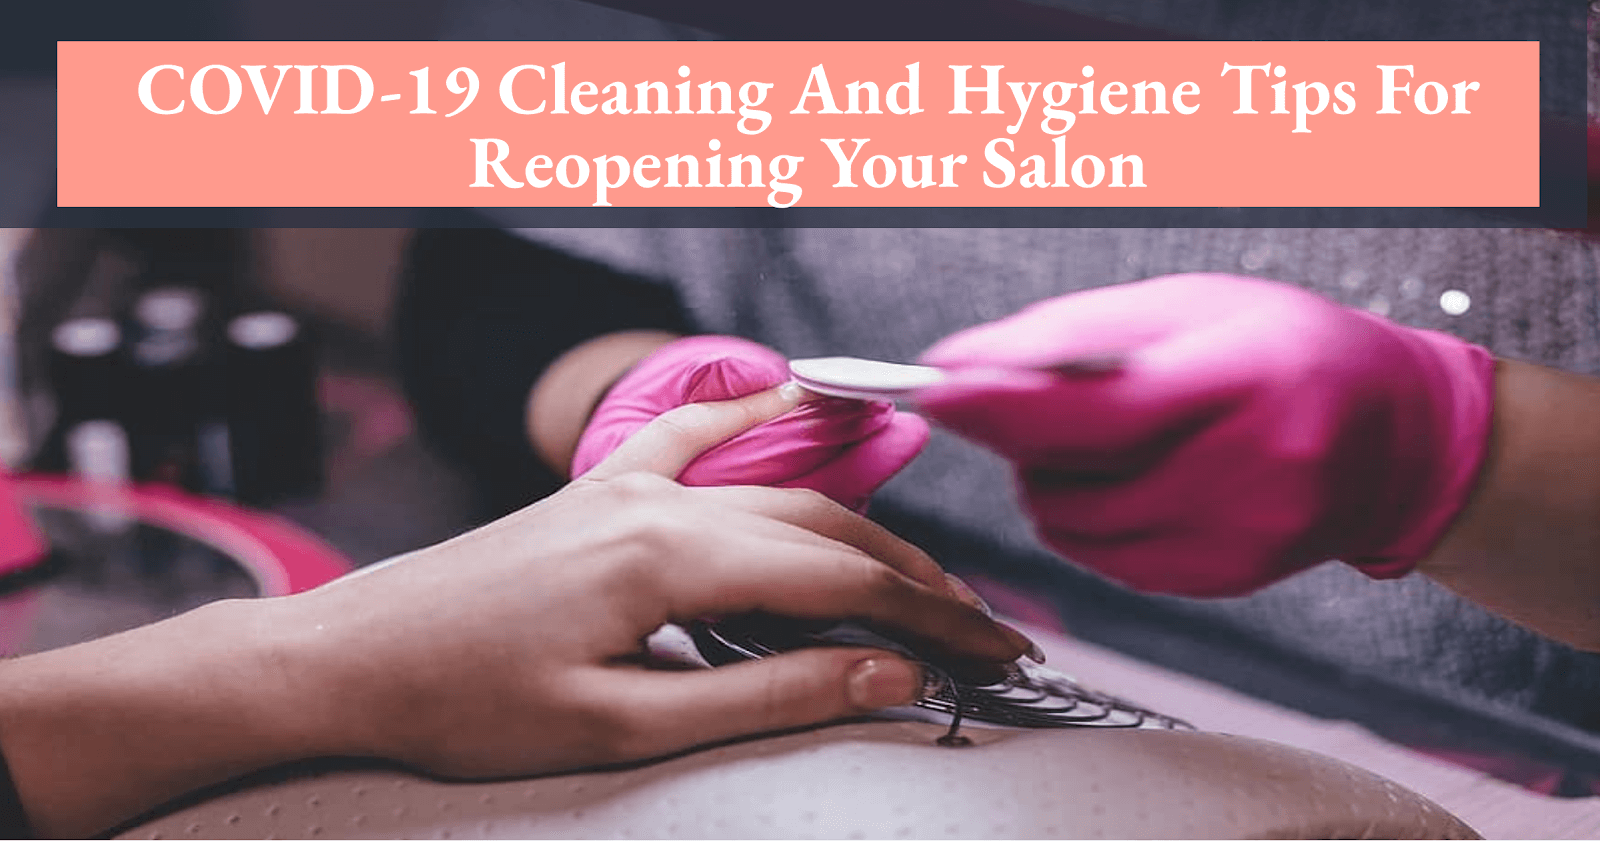 COVID-19: Cleaning And Hygiene Tips For Reopening Your Salon